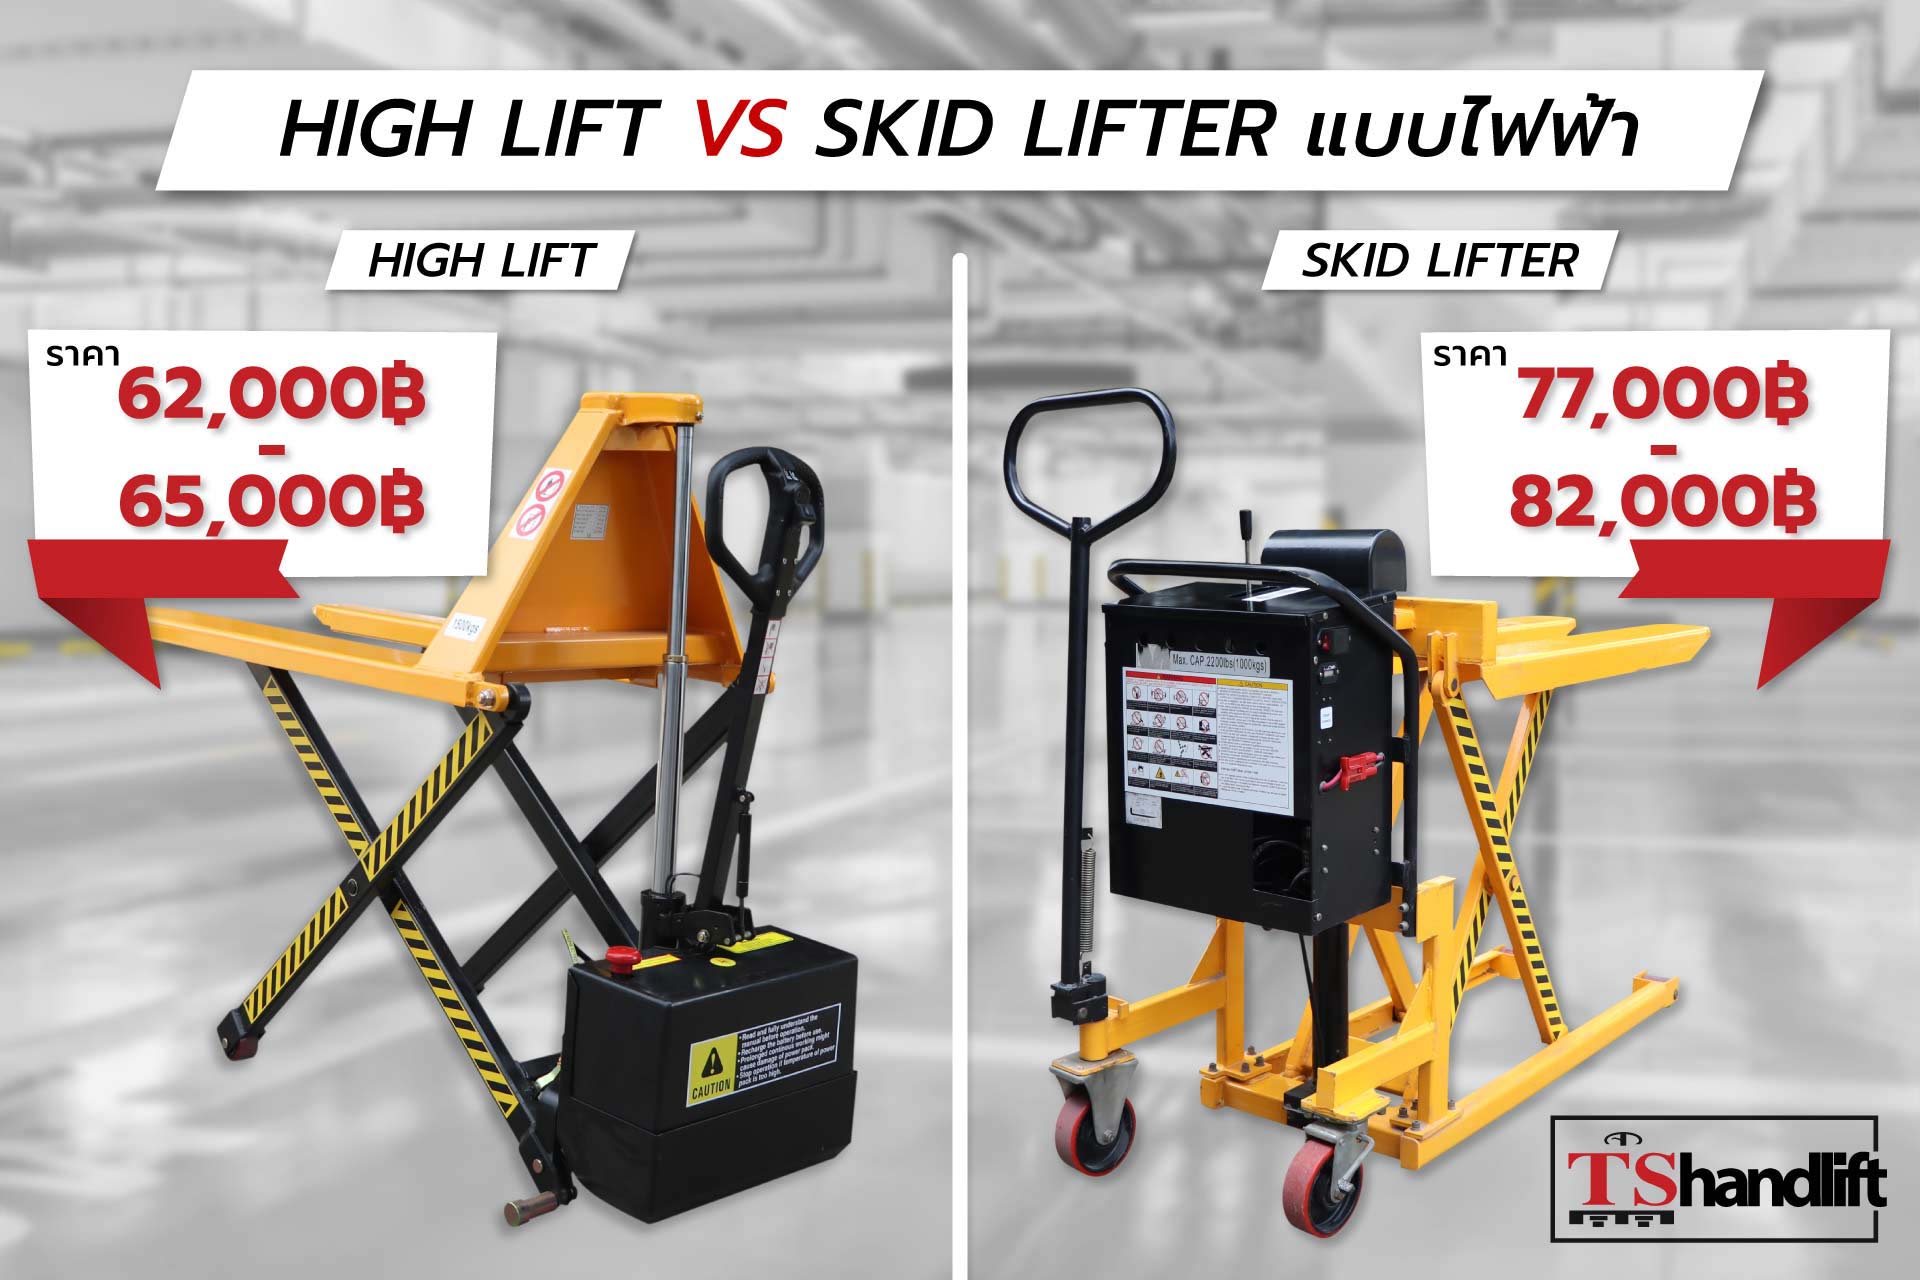 Section 03 3. 6 high lift pallet truck vs skid lifter manual product price comparison update